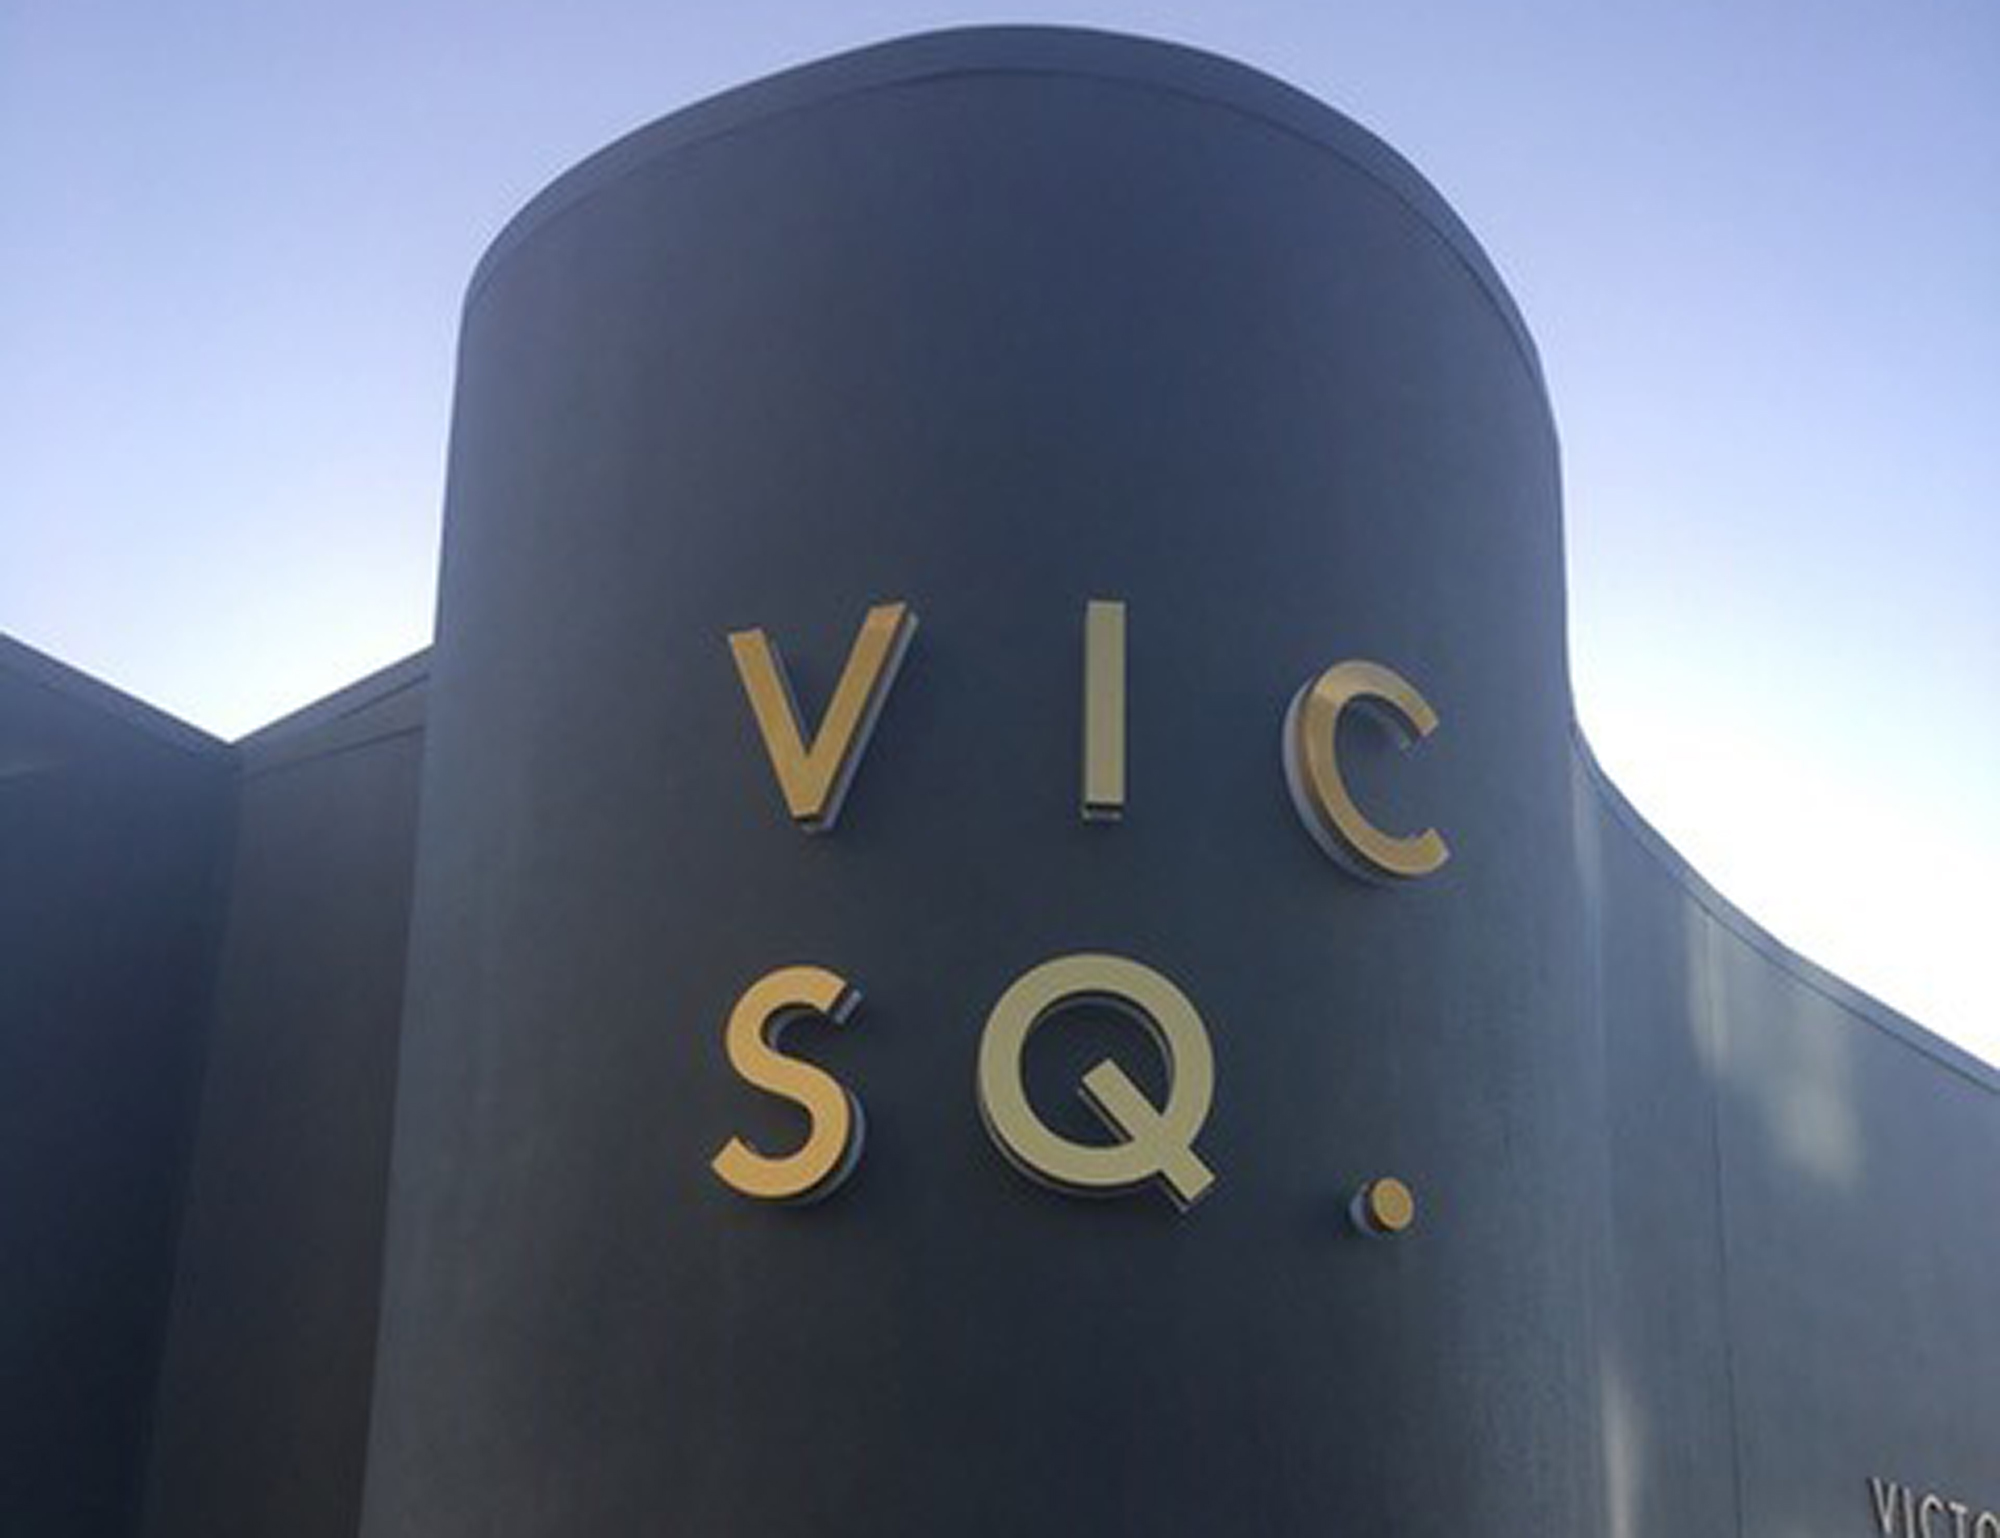 vic-square-apartments-backlit-sign